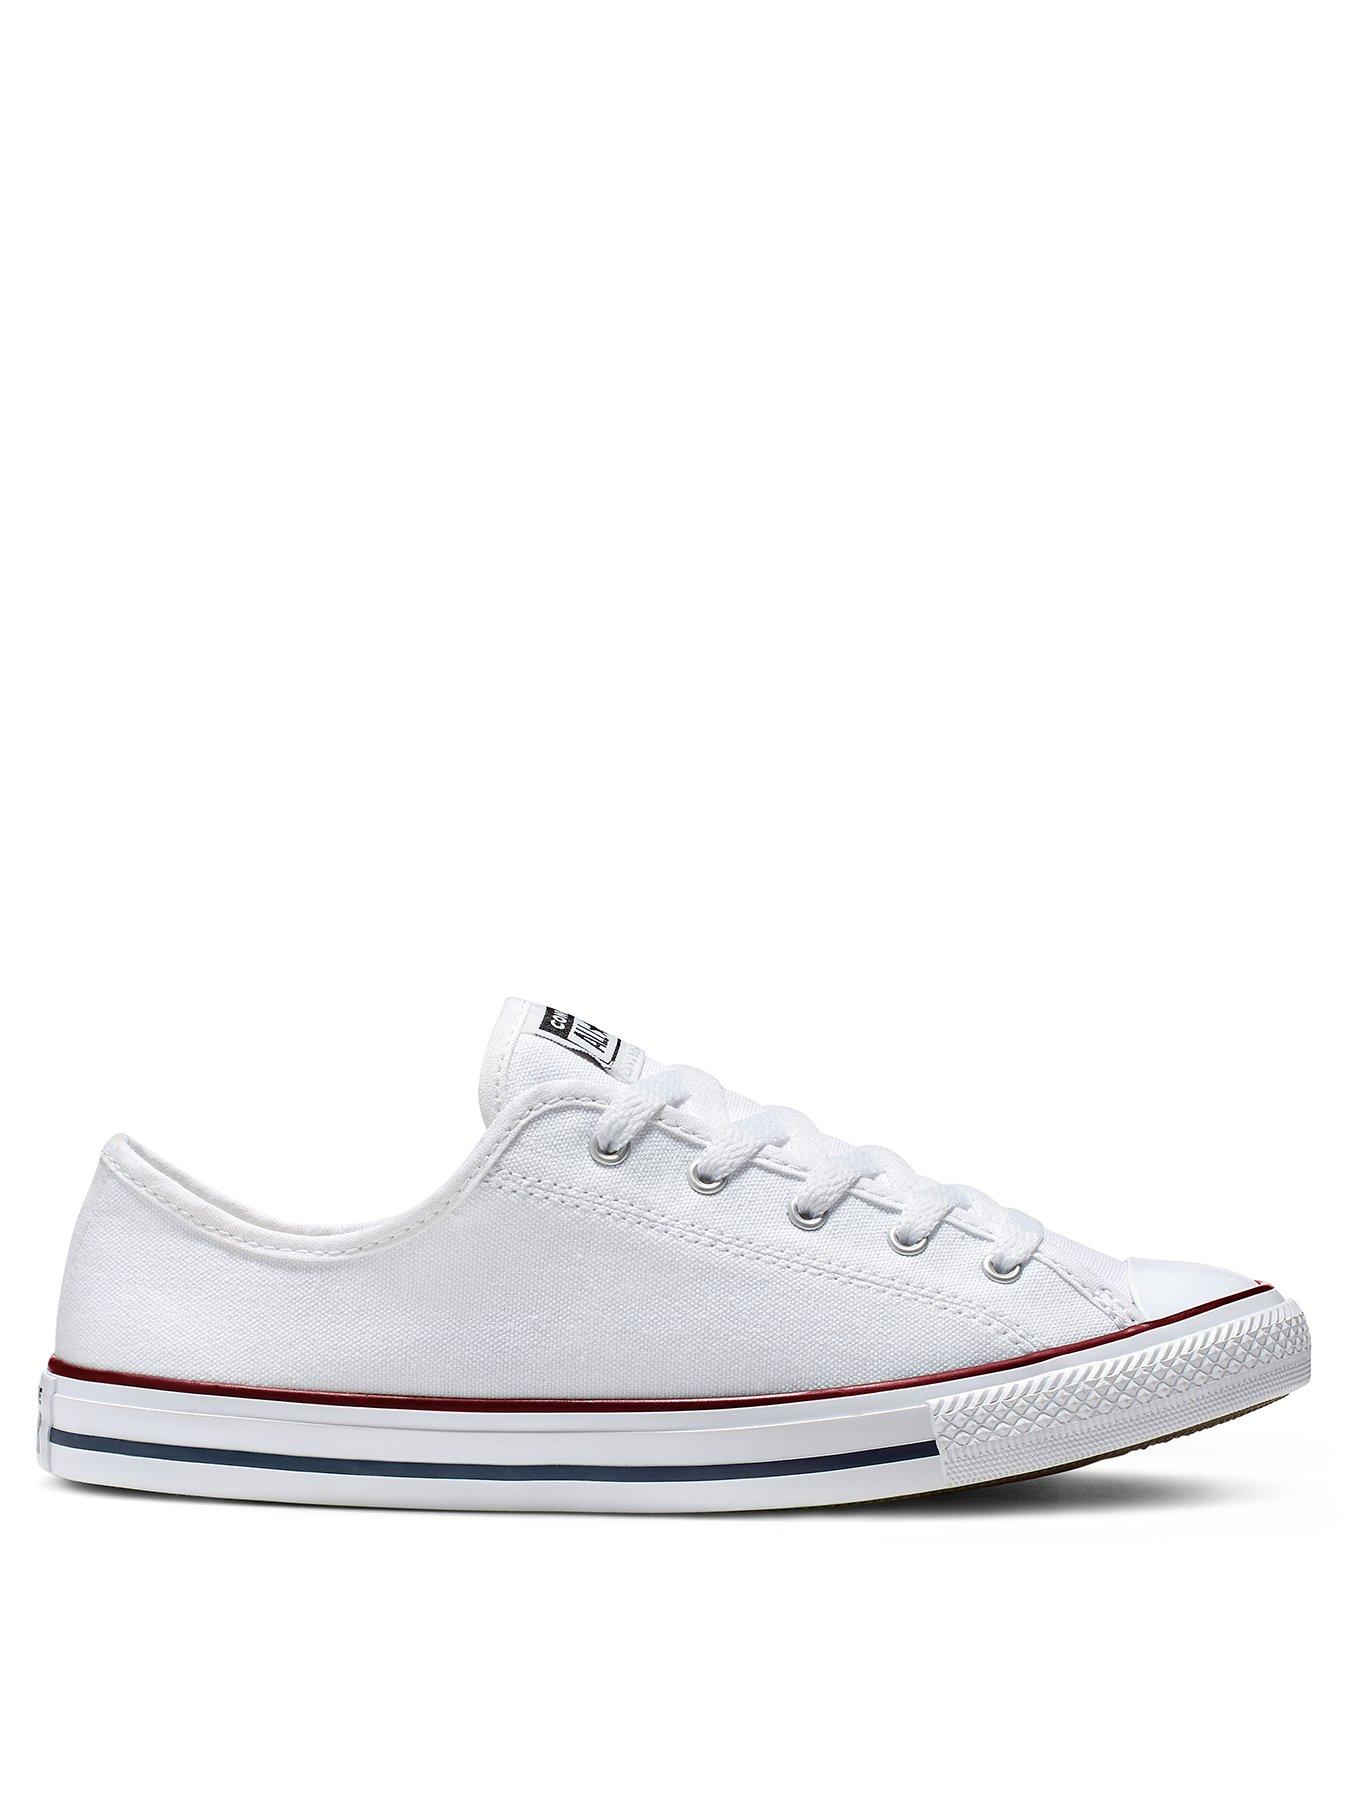 converse leather dainty ox